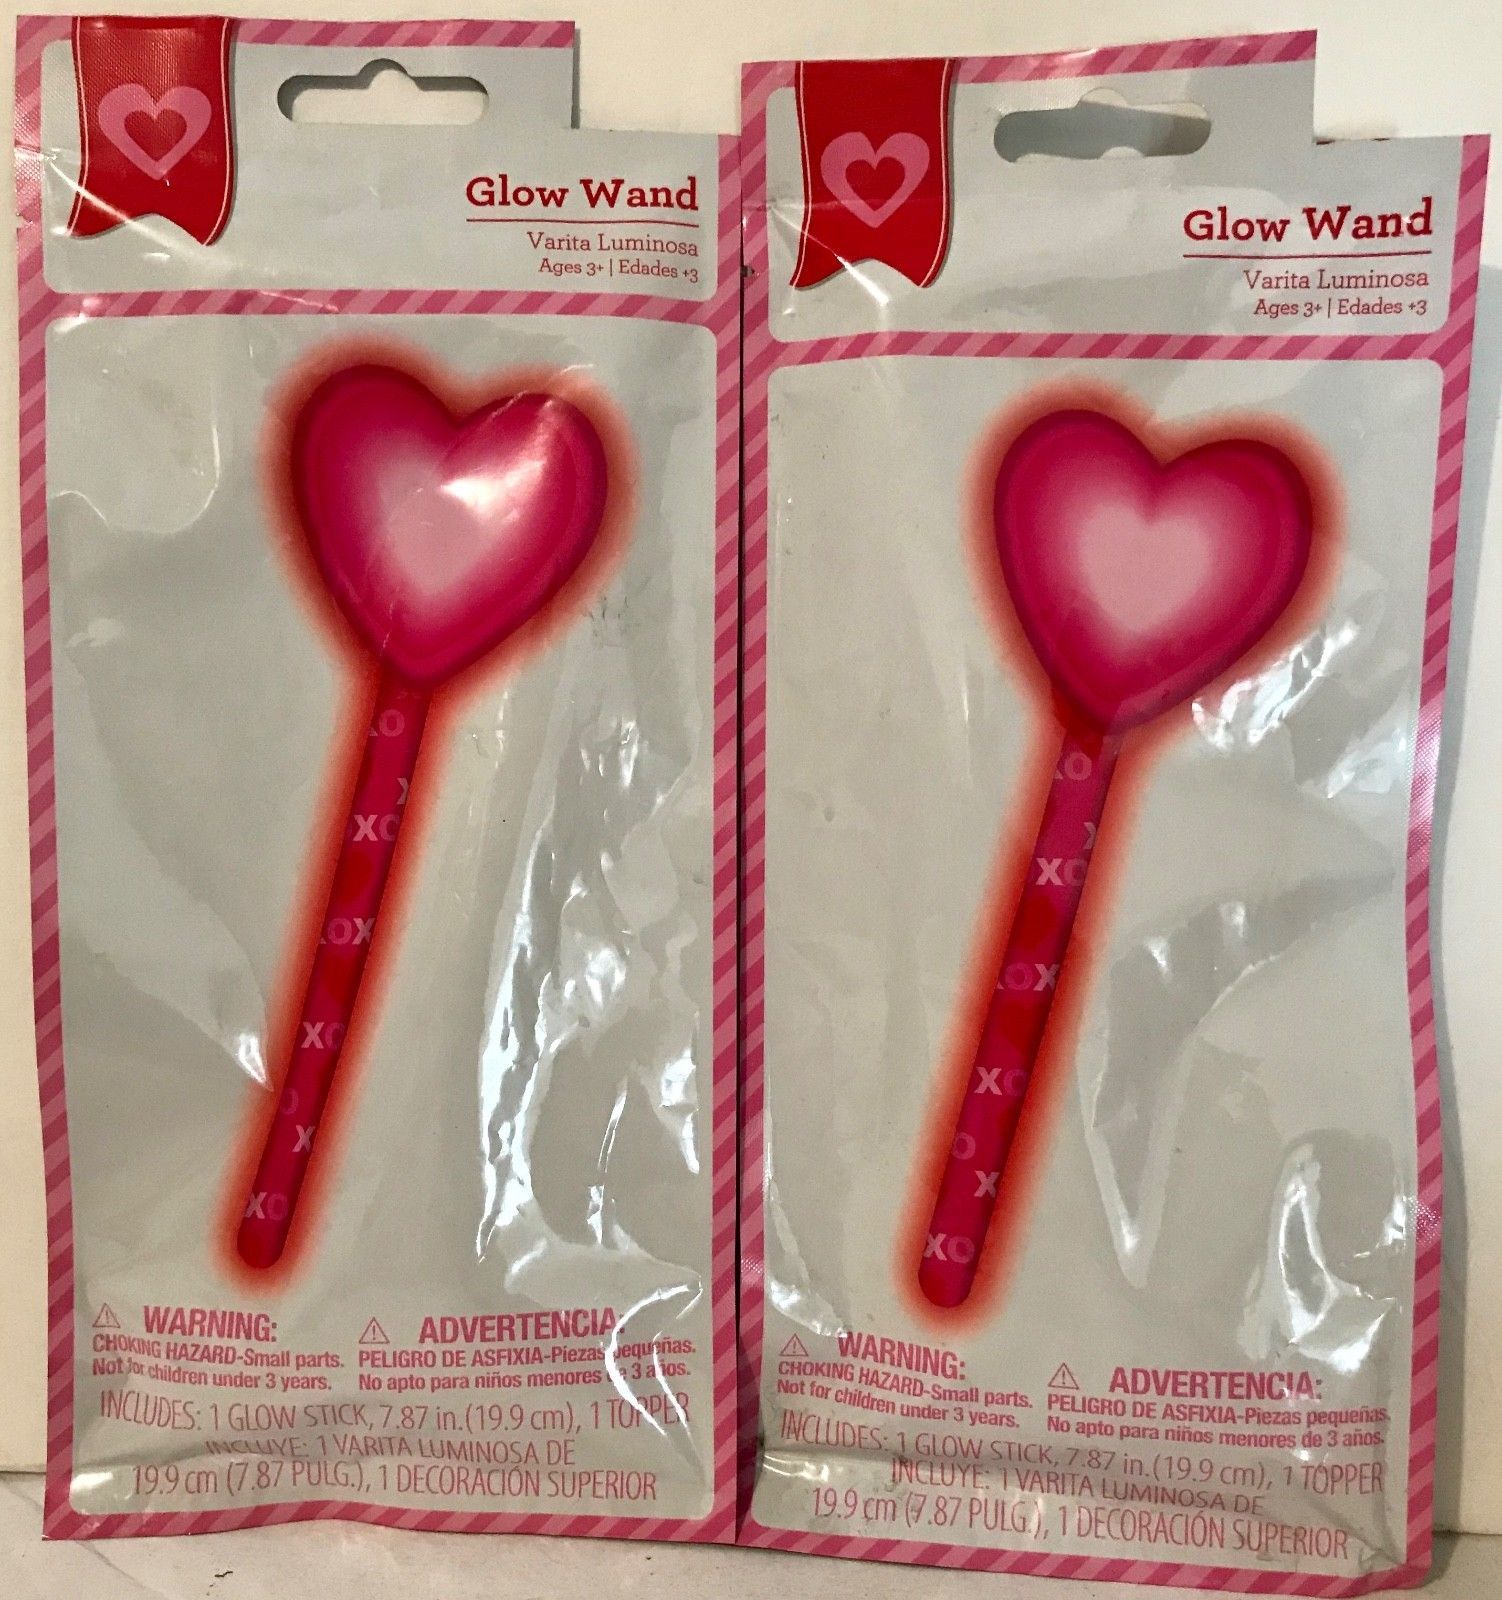 Valentine Glow Stick GLOW HEART WAND ~ Lot of 2 ~ Party Favors / Prizes - $1.94